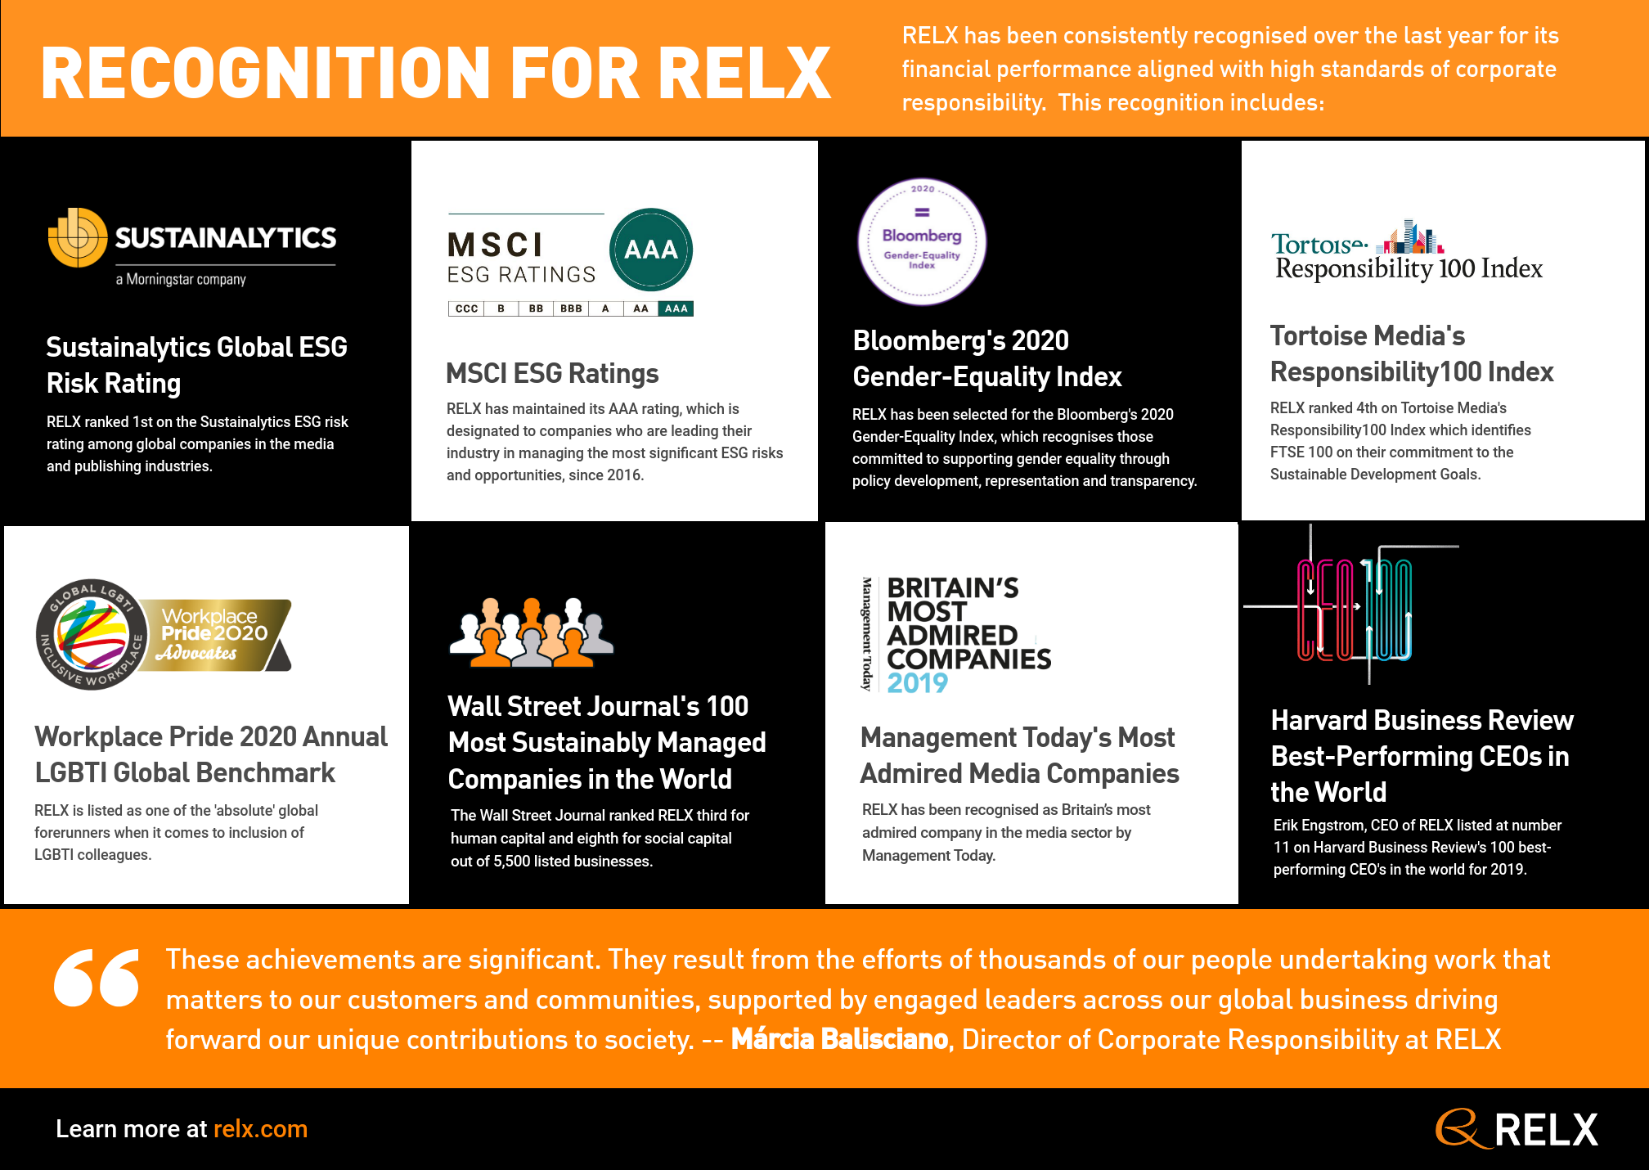 Recognition for RELX